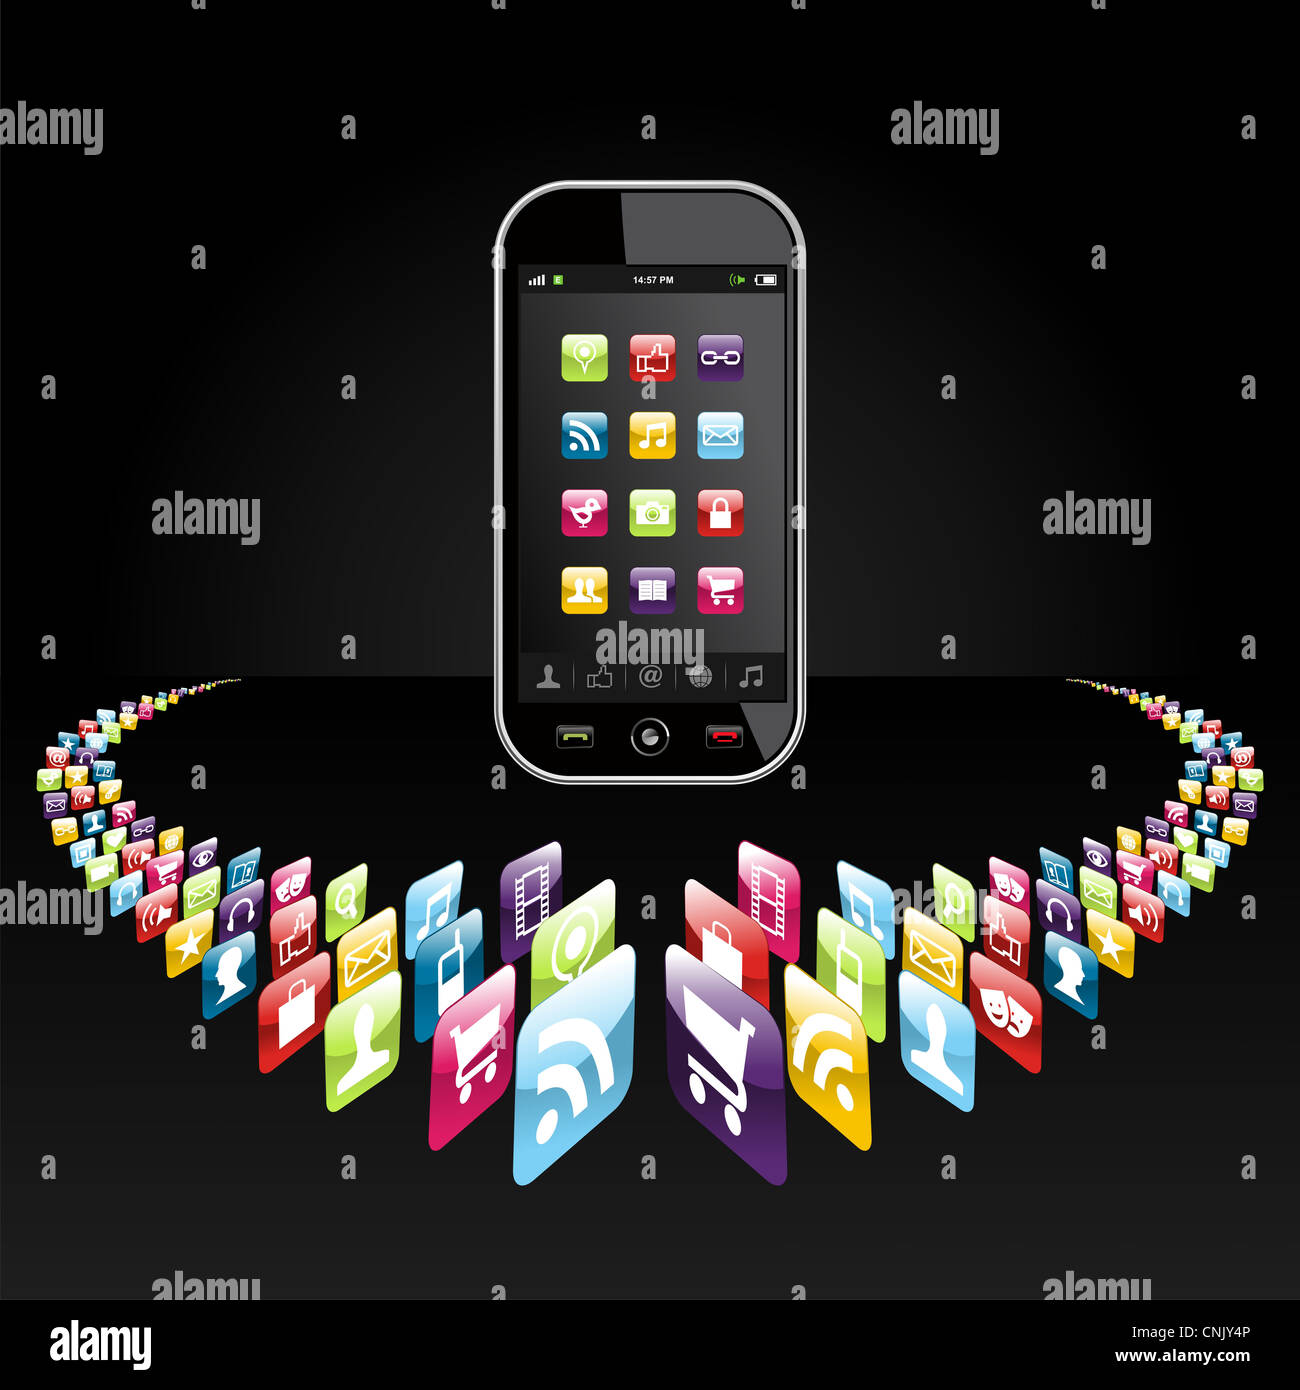 Application icons for mobile device in circle on black background. Vector file layered for easy manipulation and customisation. Stock Photo